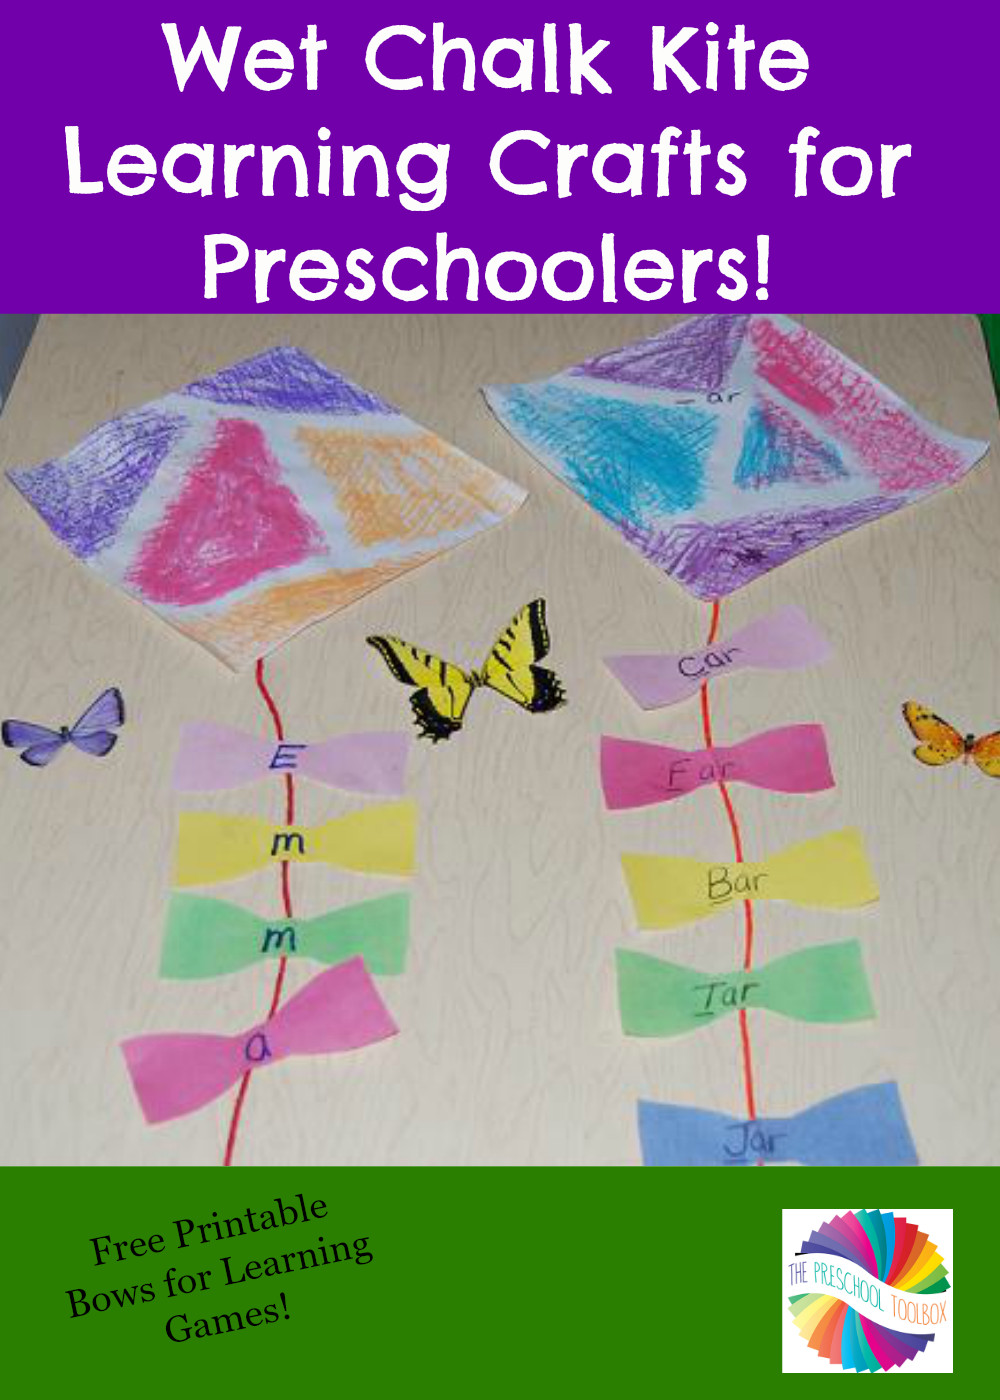 Learning Crafts For Preschoolers
 Wet Chalk Kite Learning Crafts for Preschoolers • The